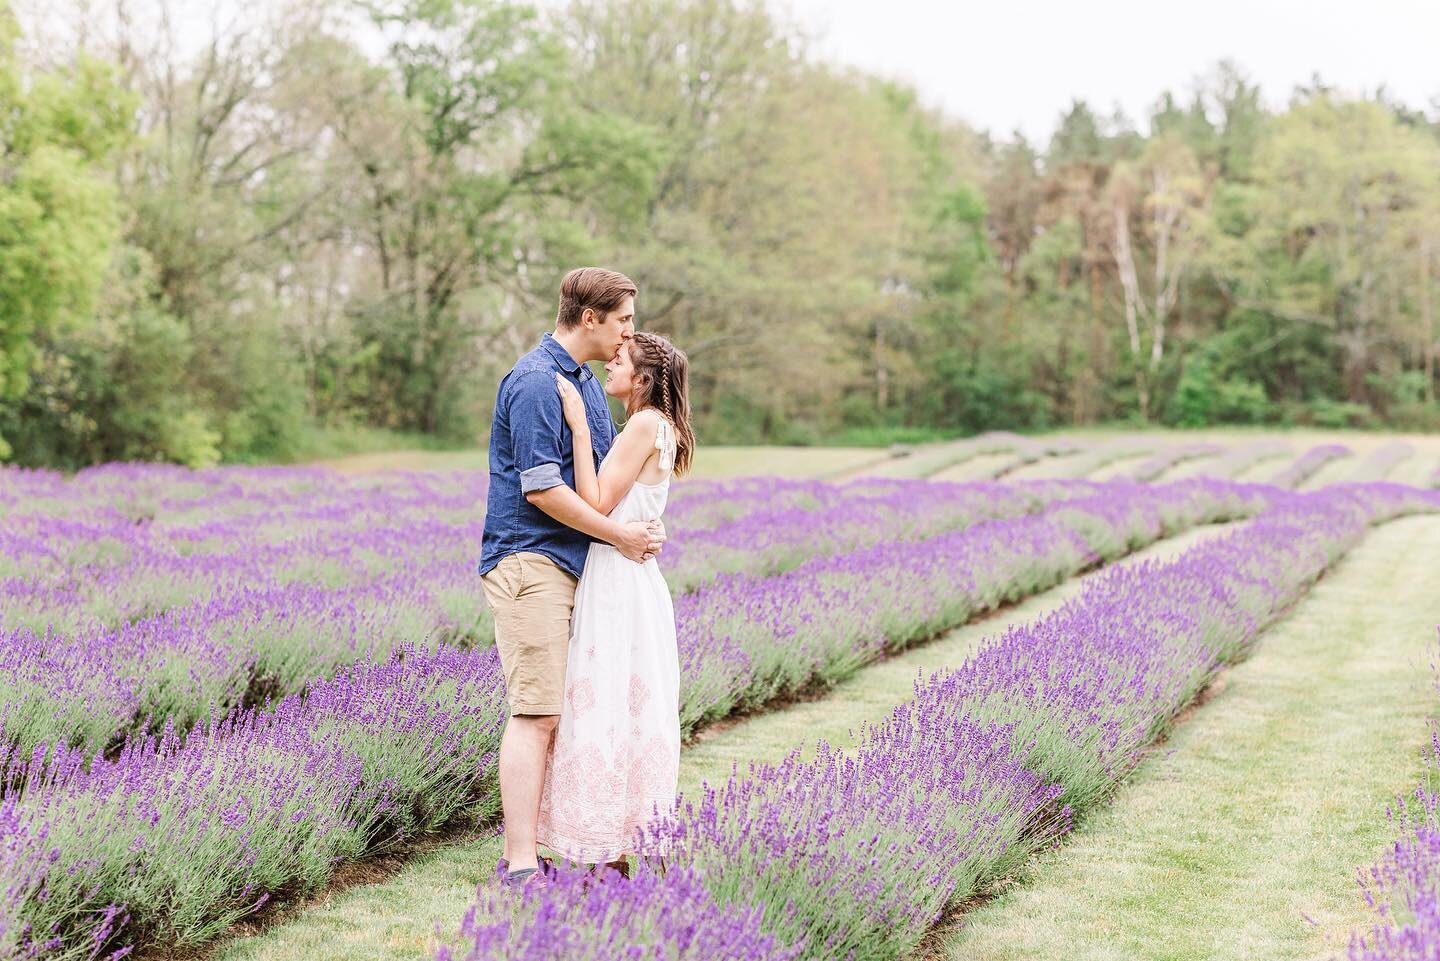 I&rsquo;ll never tire of a beautiful session at a lavender farm @laveanne_lavender 
 
This is your friendly reminder that you don&rsquo;t need a special occasion to document your love. There are no rules that say you need to wait for the ring, the bu